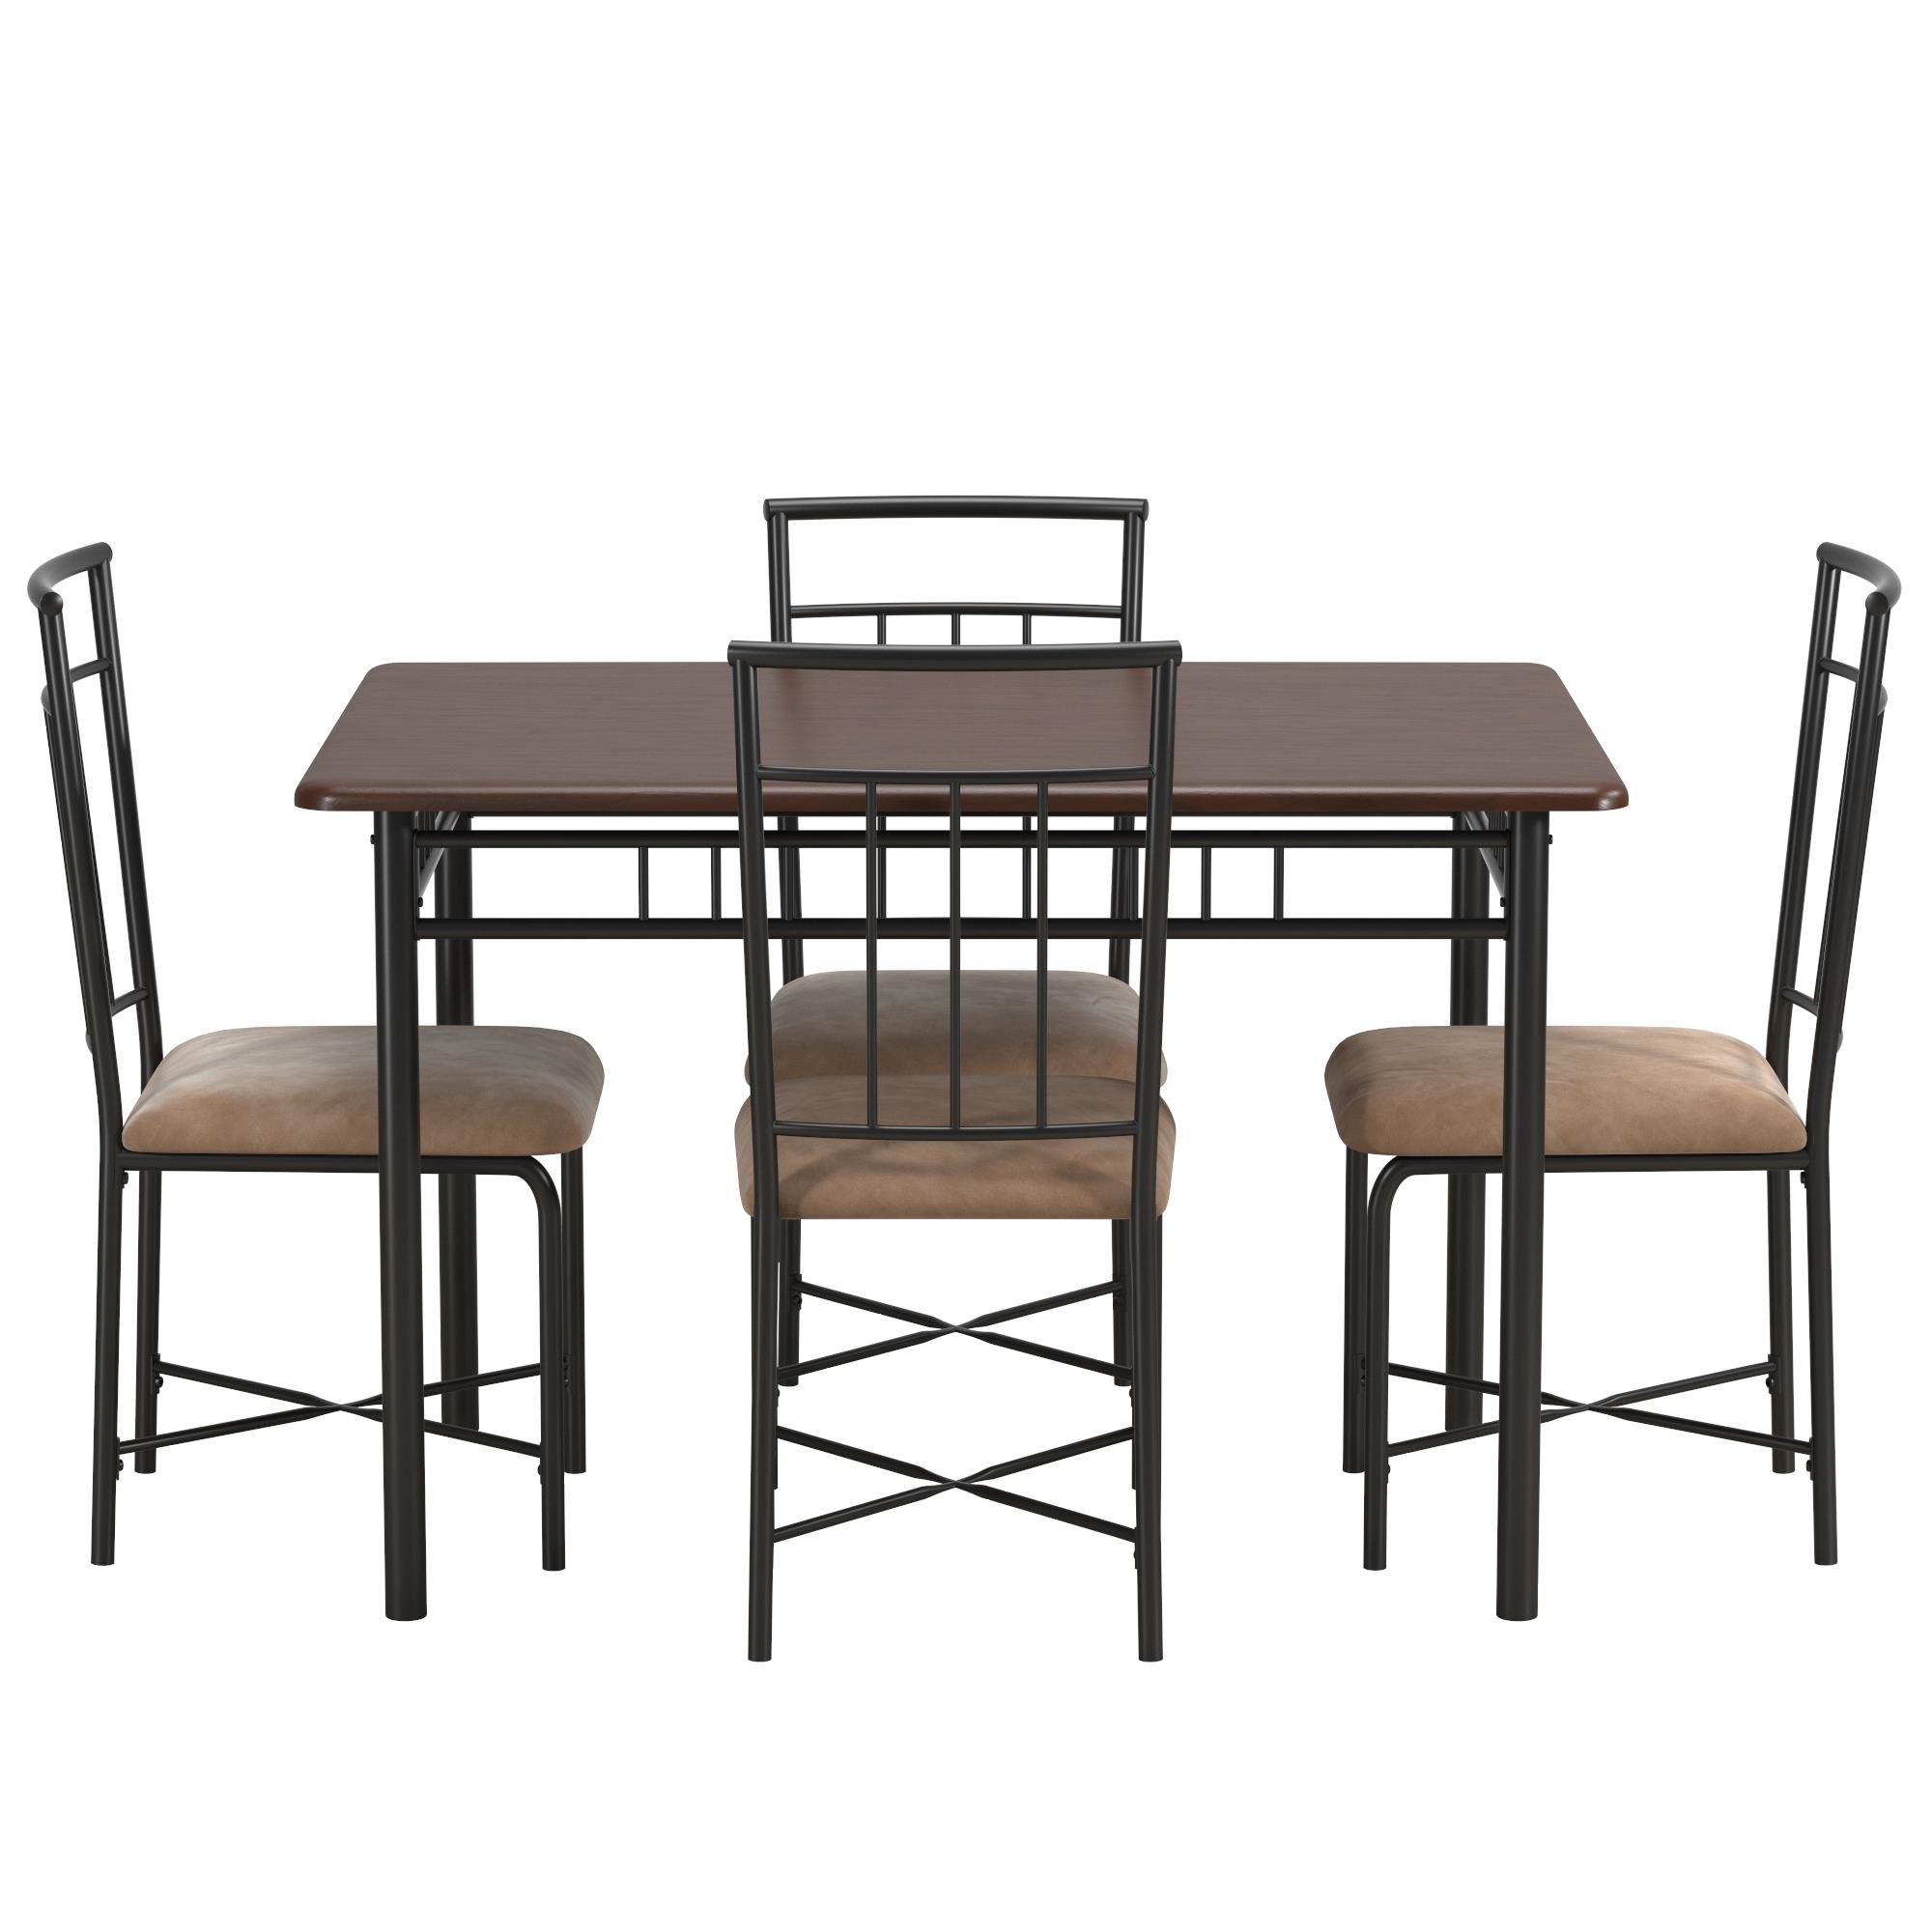 Mainstays Louise Traditional 5-Piece Wood & Metal Dining Set, Deep Walnut - image 14 of 22